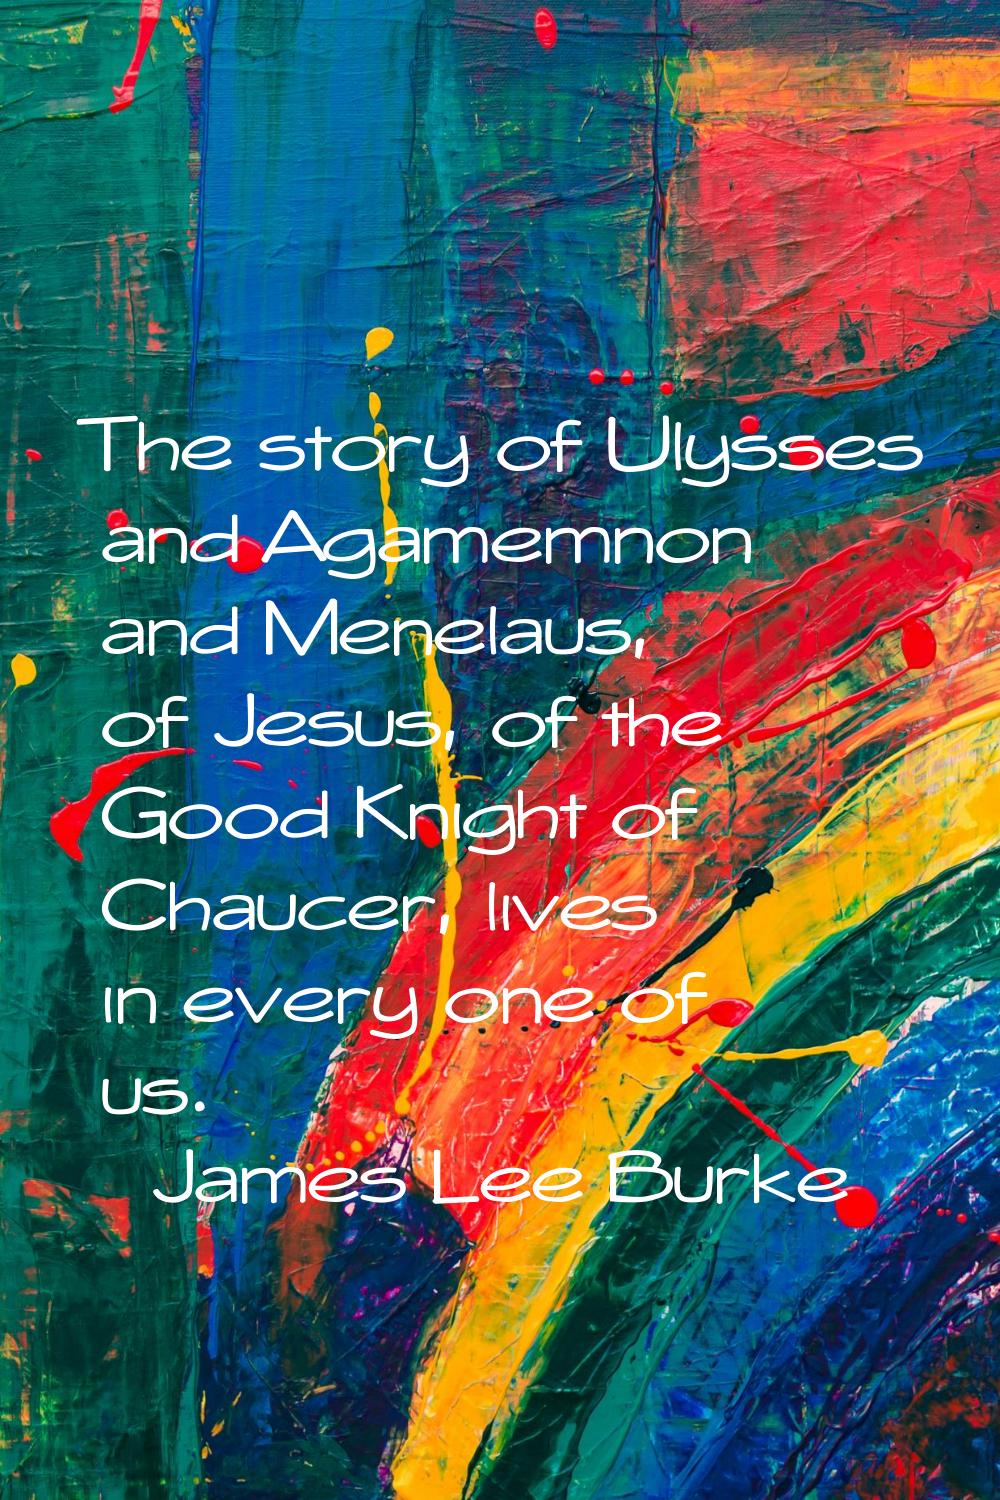 The story of Ulysses and Agamemnon and Menelaus, of Jesus, of the Good Knight of Chaucer, lives in 